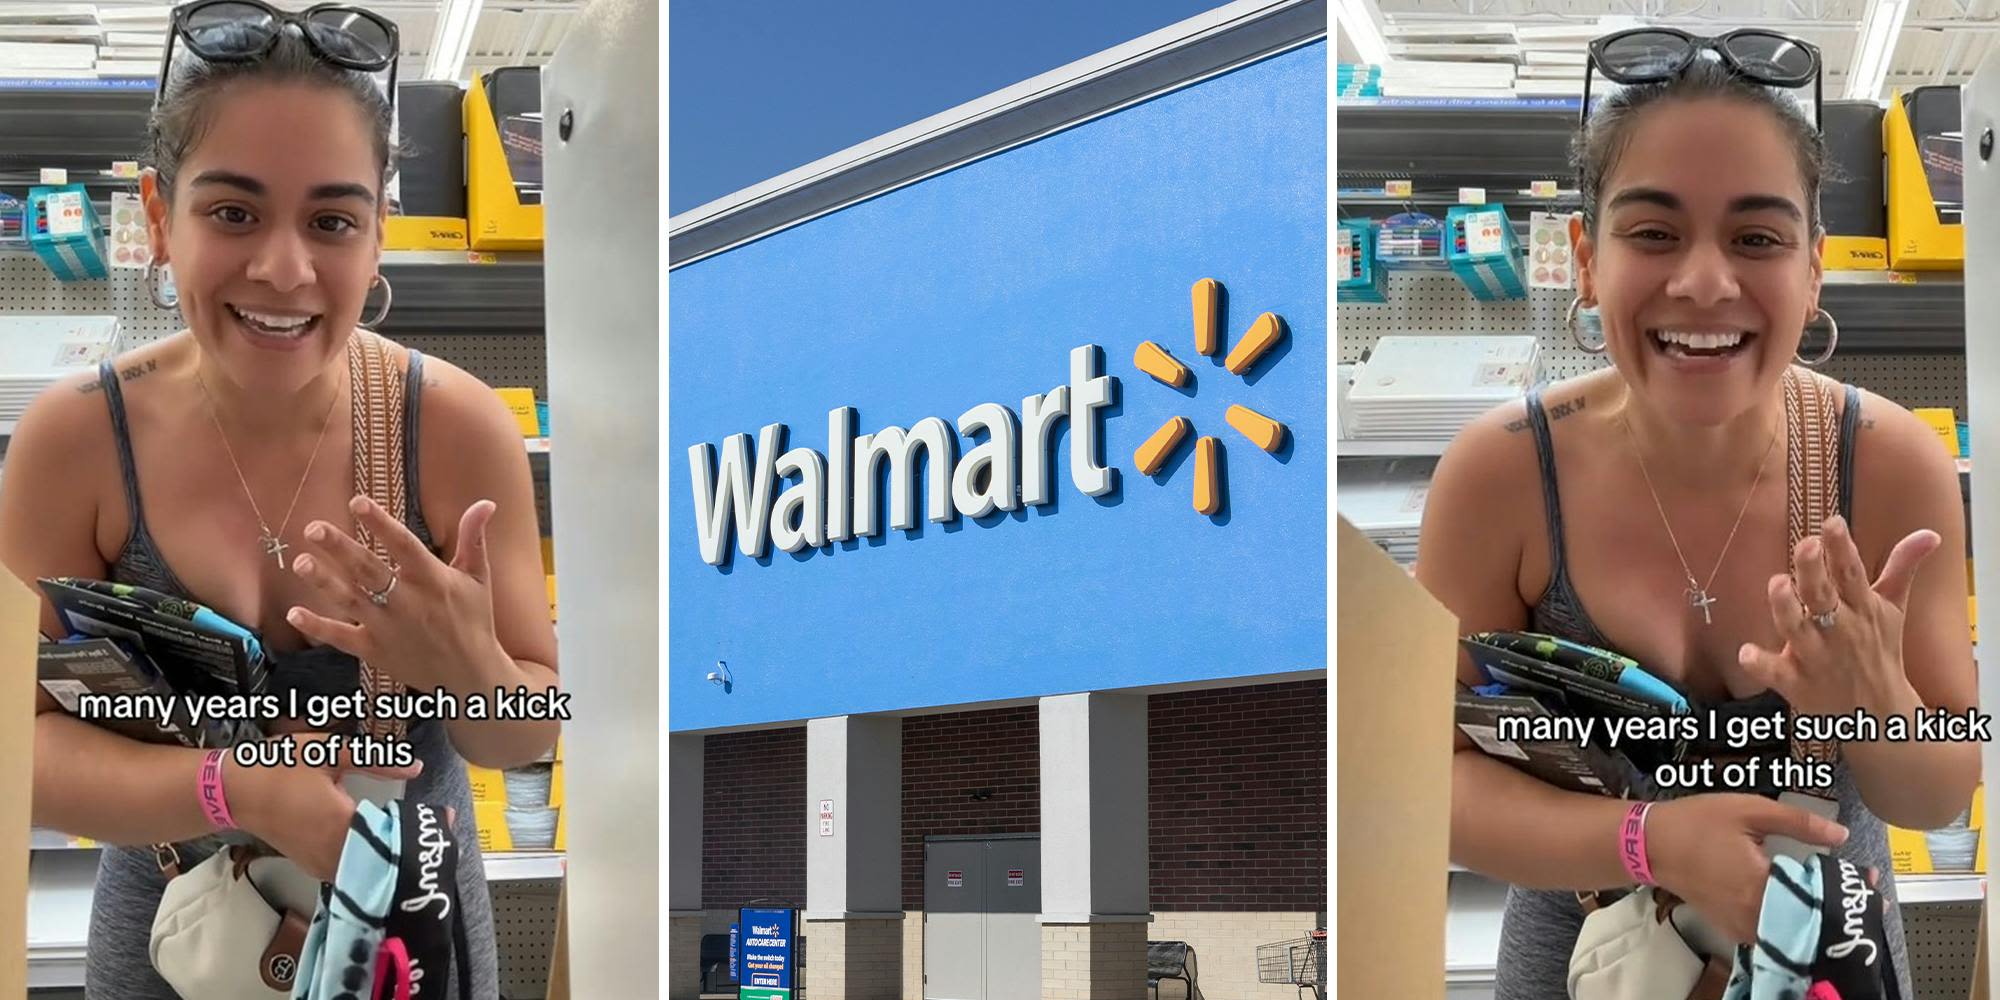 'Who takes their time to steal clearance items?': Walmart customer slams secret shoppers for following the 'wrong people' around store